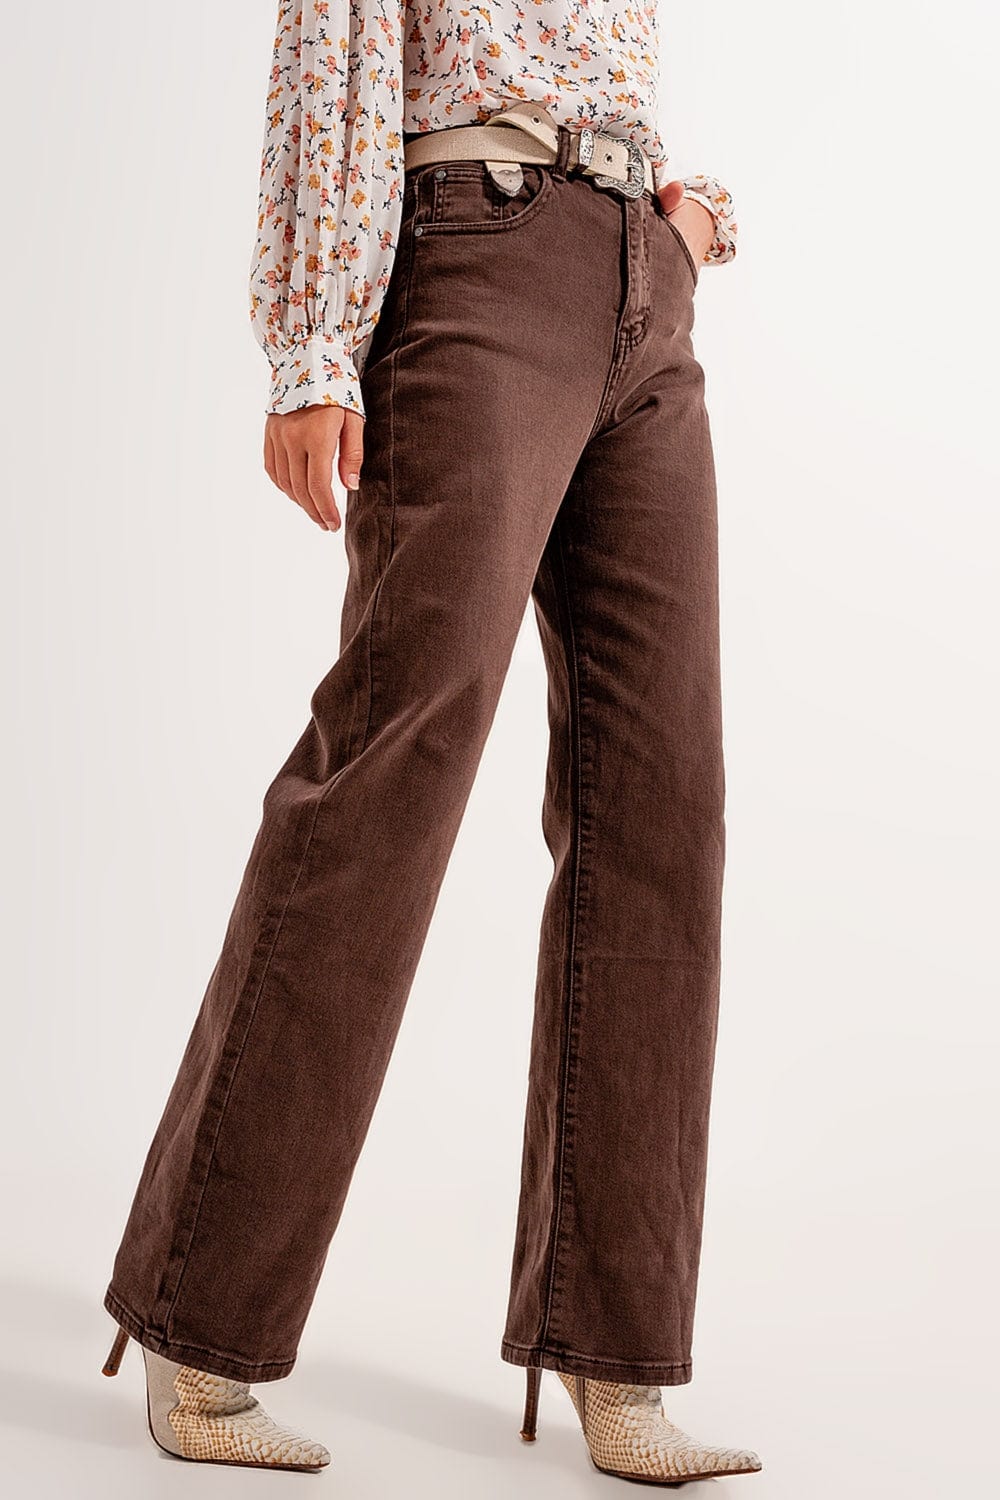 Q2 Women's Pants & Trousers High Rise Slouchy Mom Jeans in Chocolate